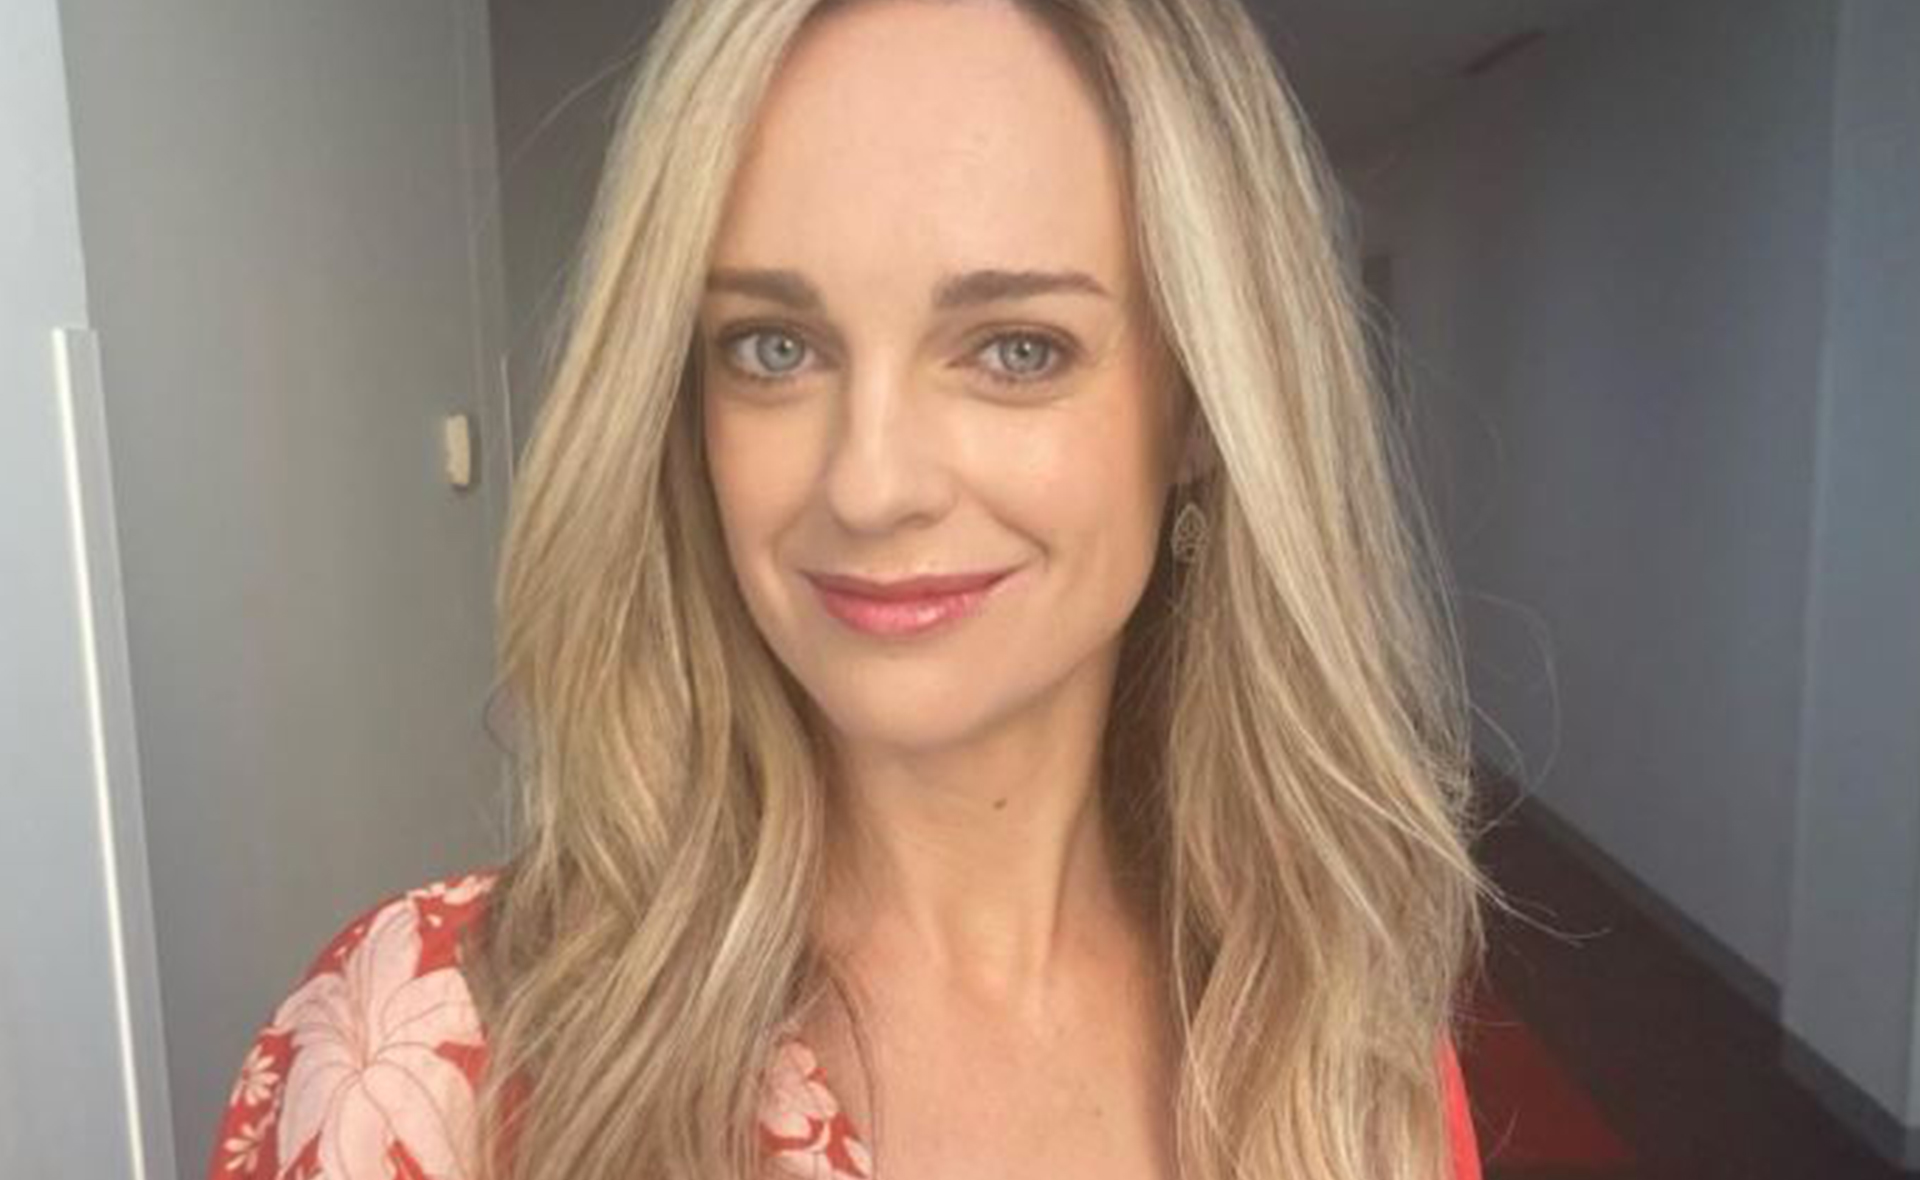 Home and Away’s Penny Mcnamee sizzles in her new 80s hair makeover and this sultry look can easily be achieved at home